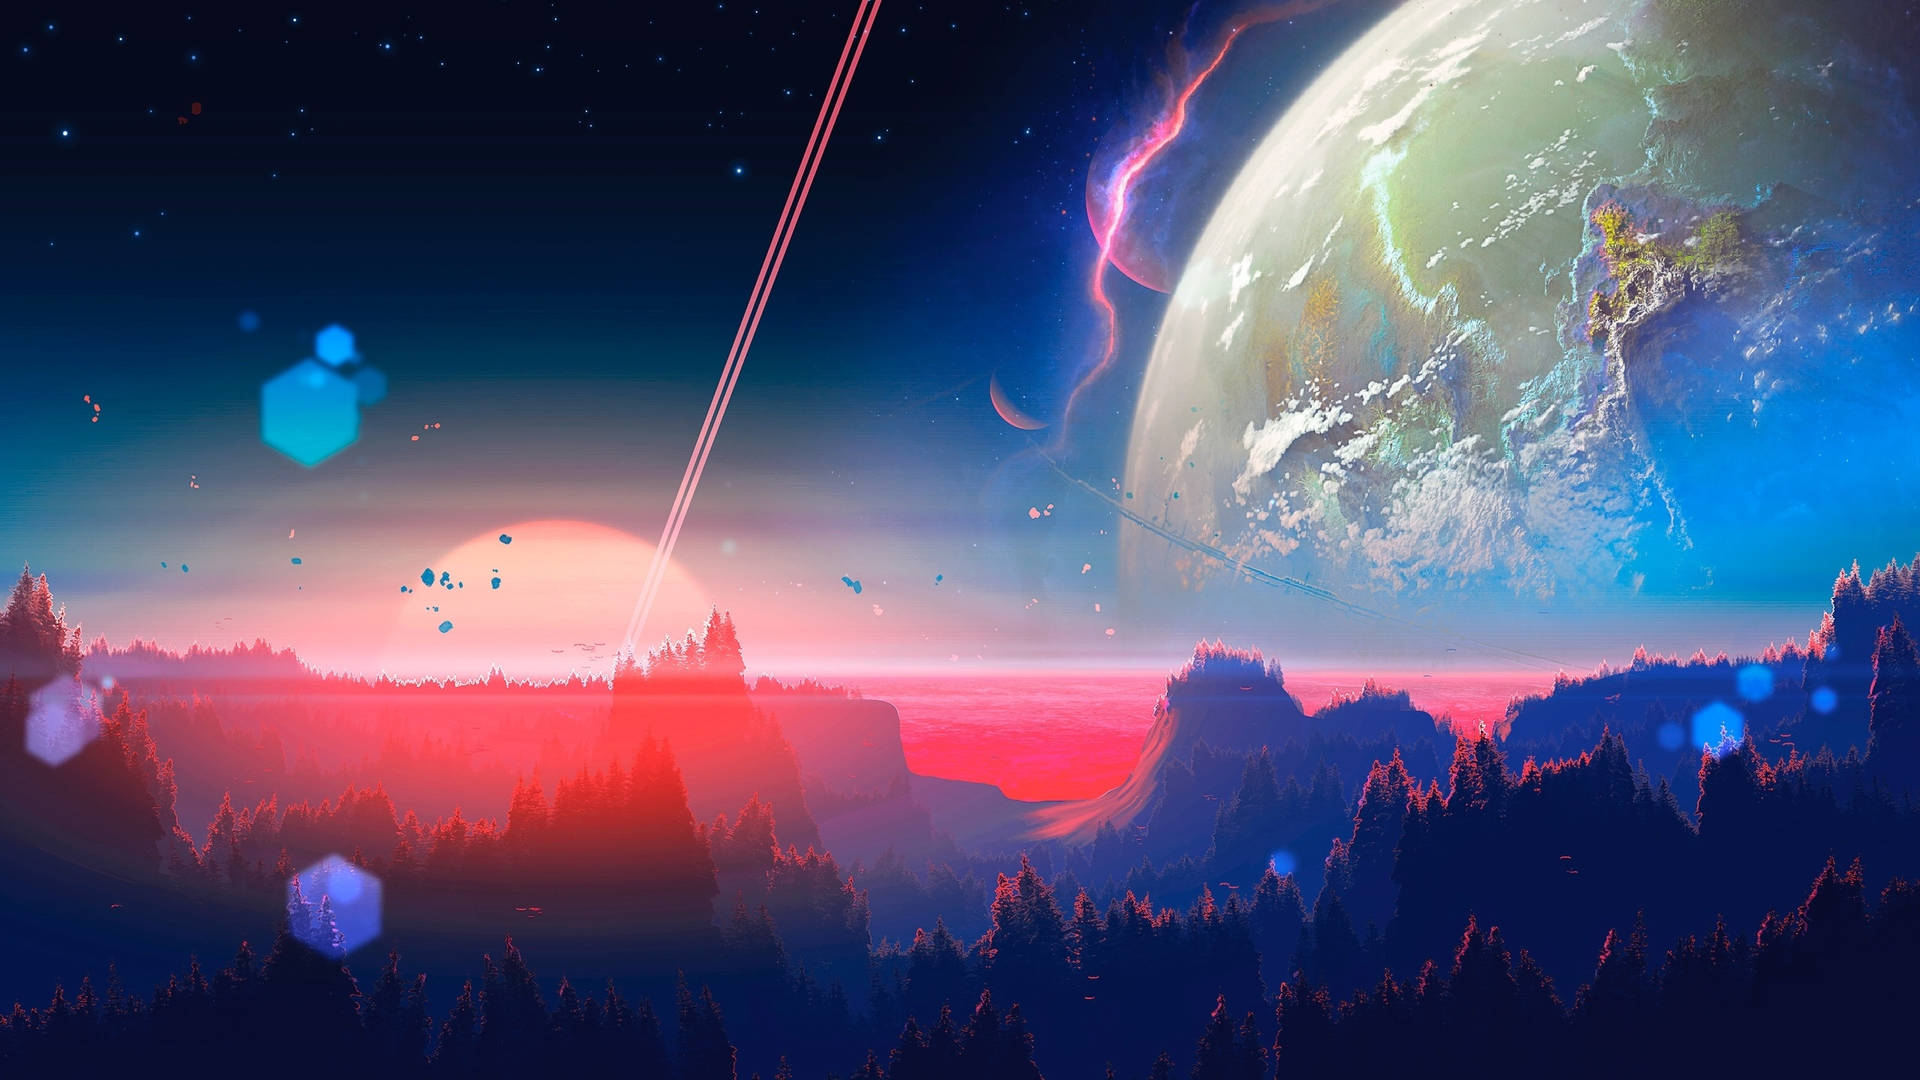 Sunset In Space 2560x1440 Wallpaper